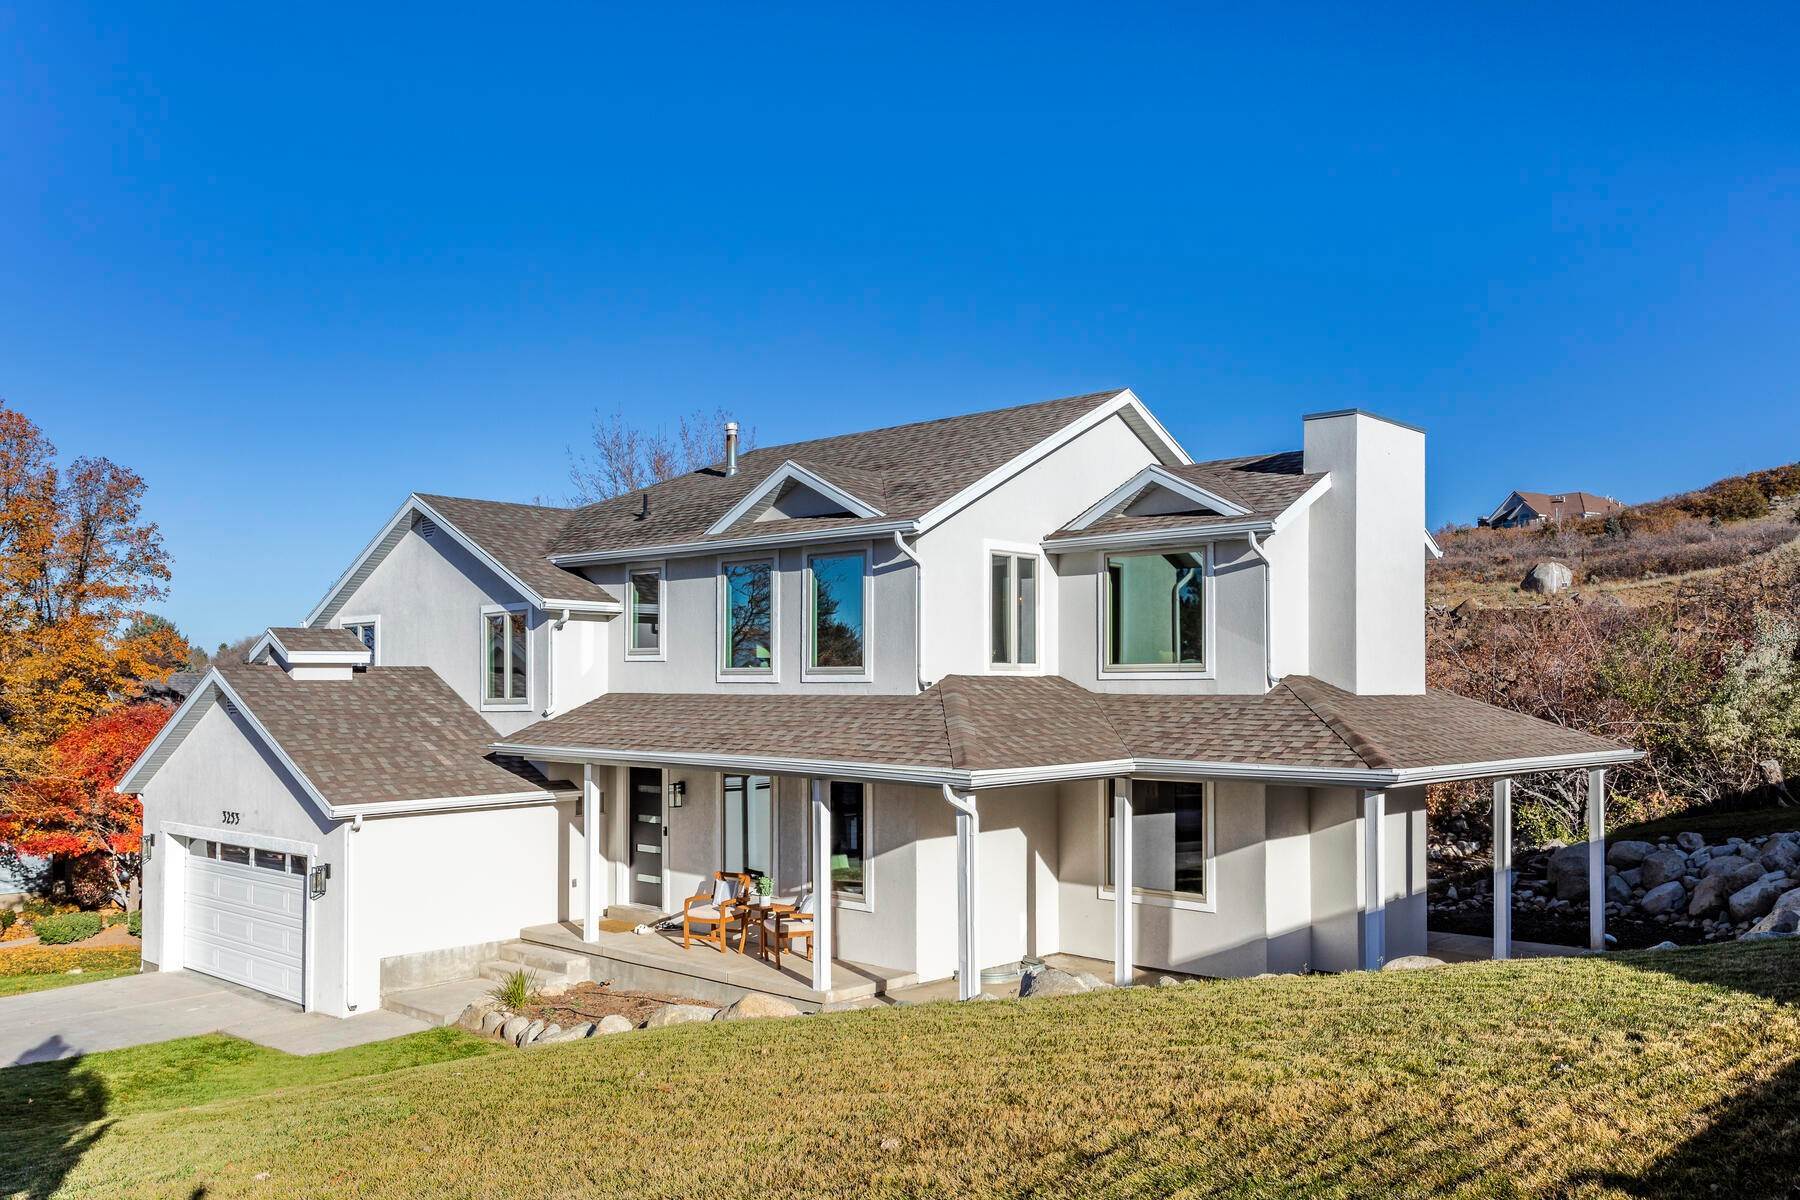 39. Single Family Homes for Sale at Updated 2-Story At The Base Of Little Cottonwood Canyon 3253 E Bell Canyon Rd Sandy, Utah 84092 United States